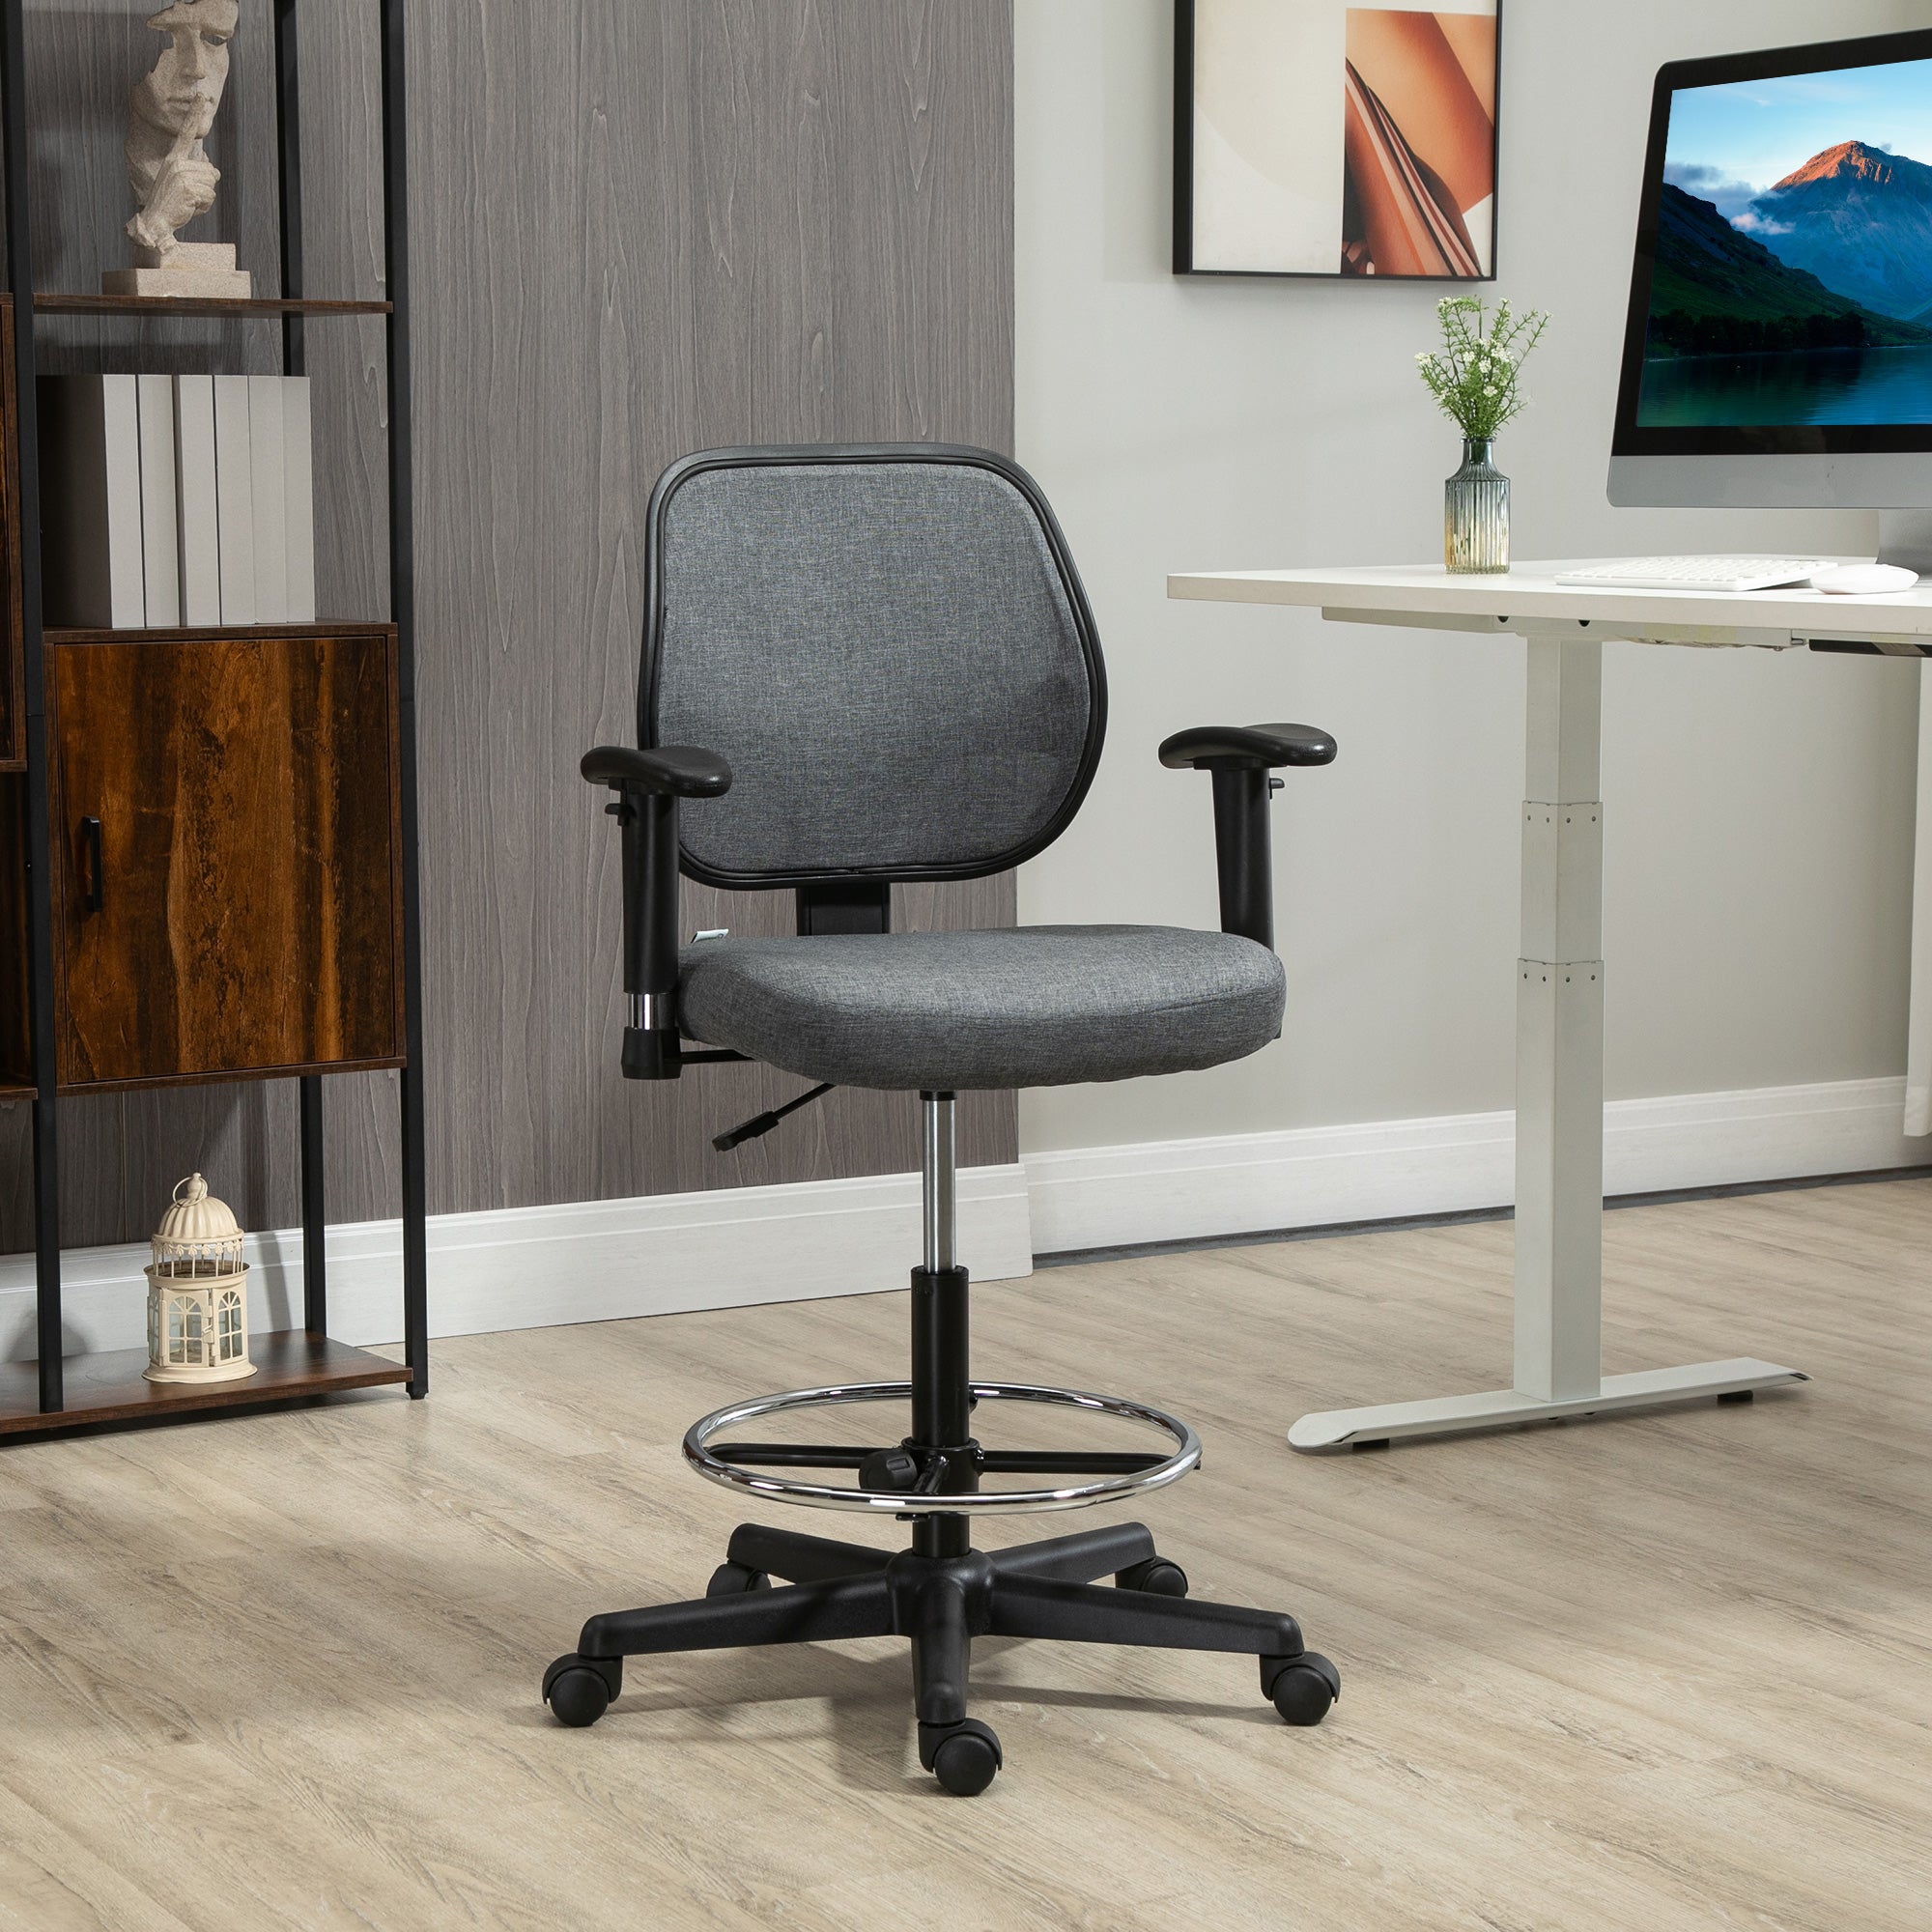 Drafting Chair Tall Office Fabric Standing Desk Chair with Adjustable Footrest Ring, Arm, Swivel Wheels, Grey-1